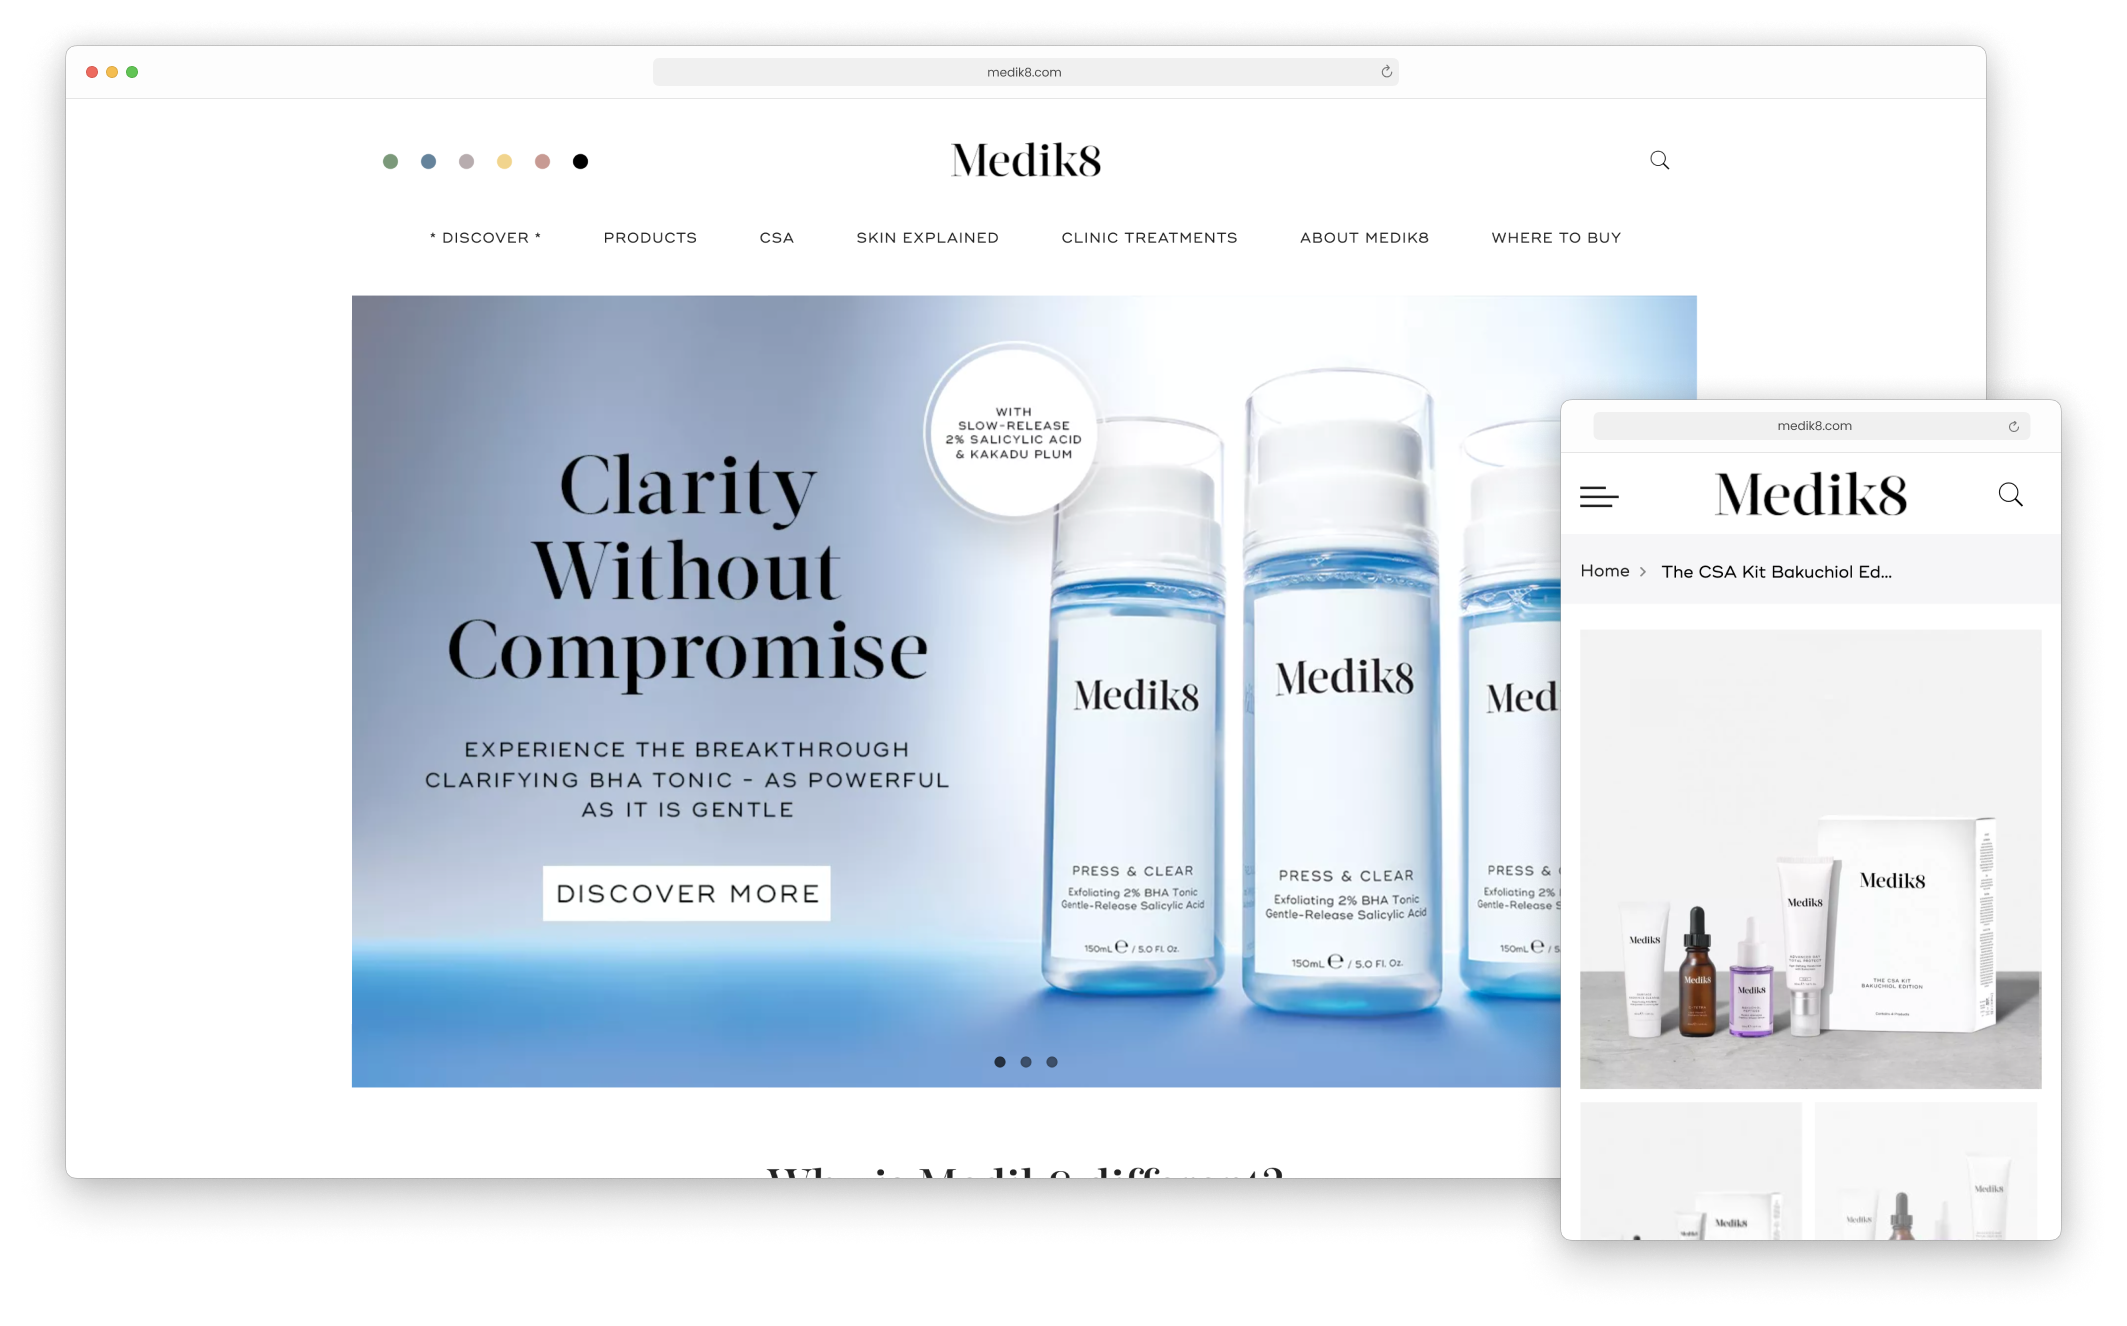 Desktop and mobile view of the Medik8 homepage and product page